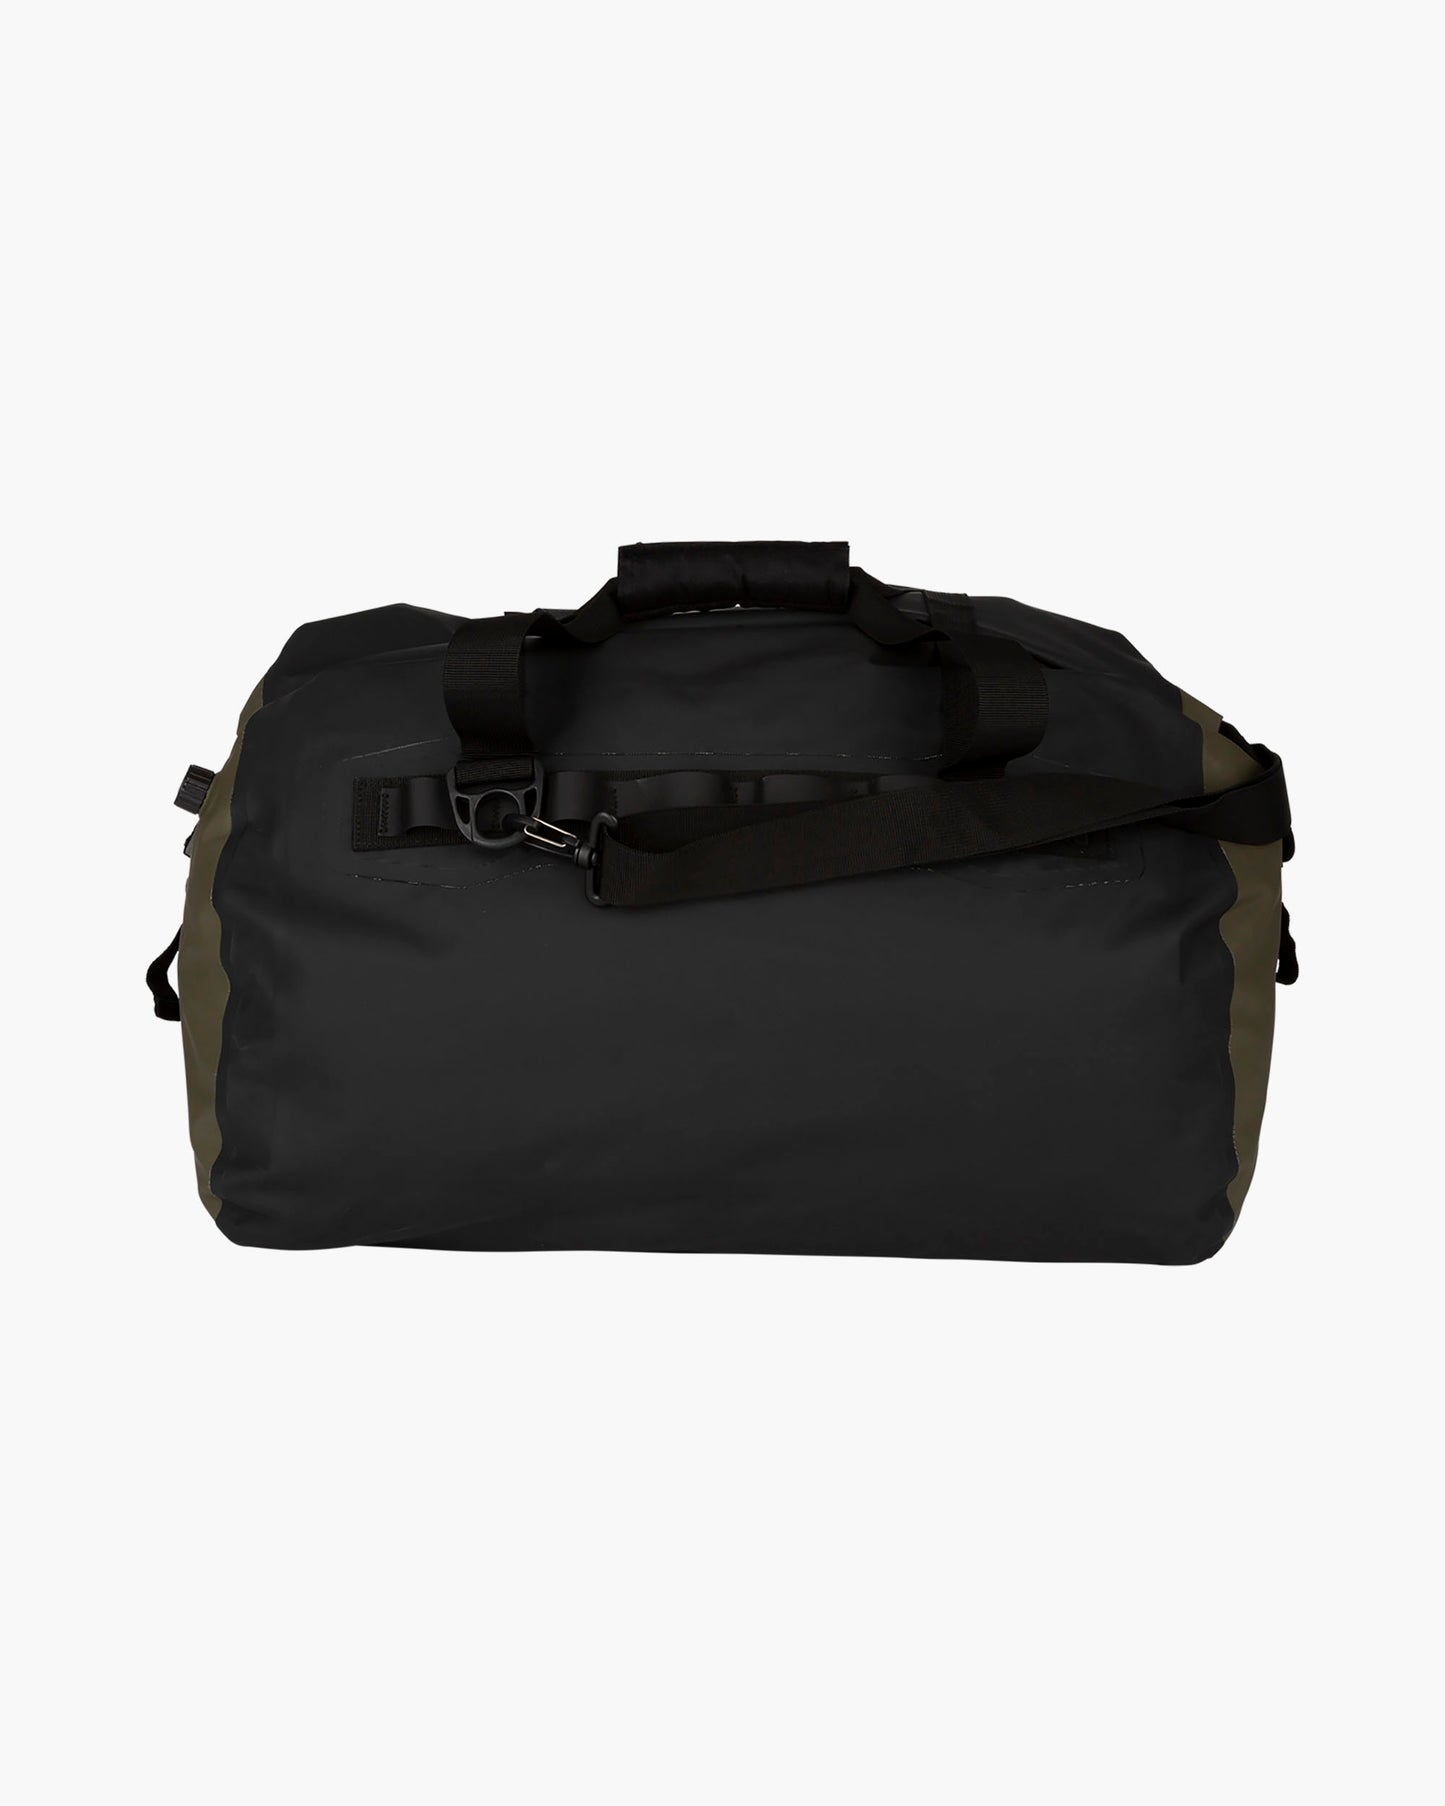 VOYAGER DUFFLE - Black/Military